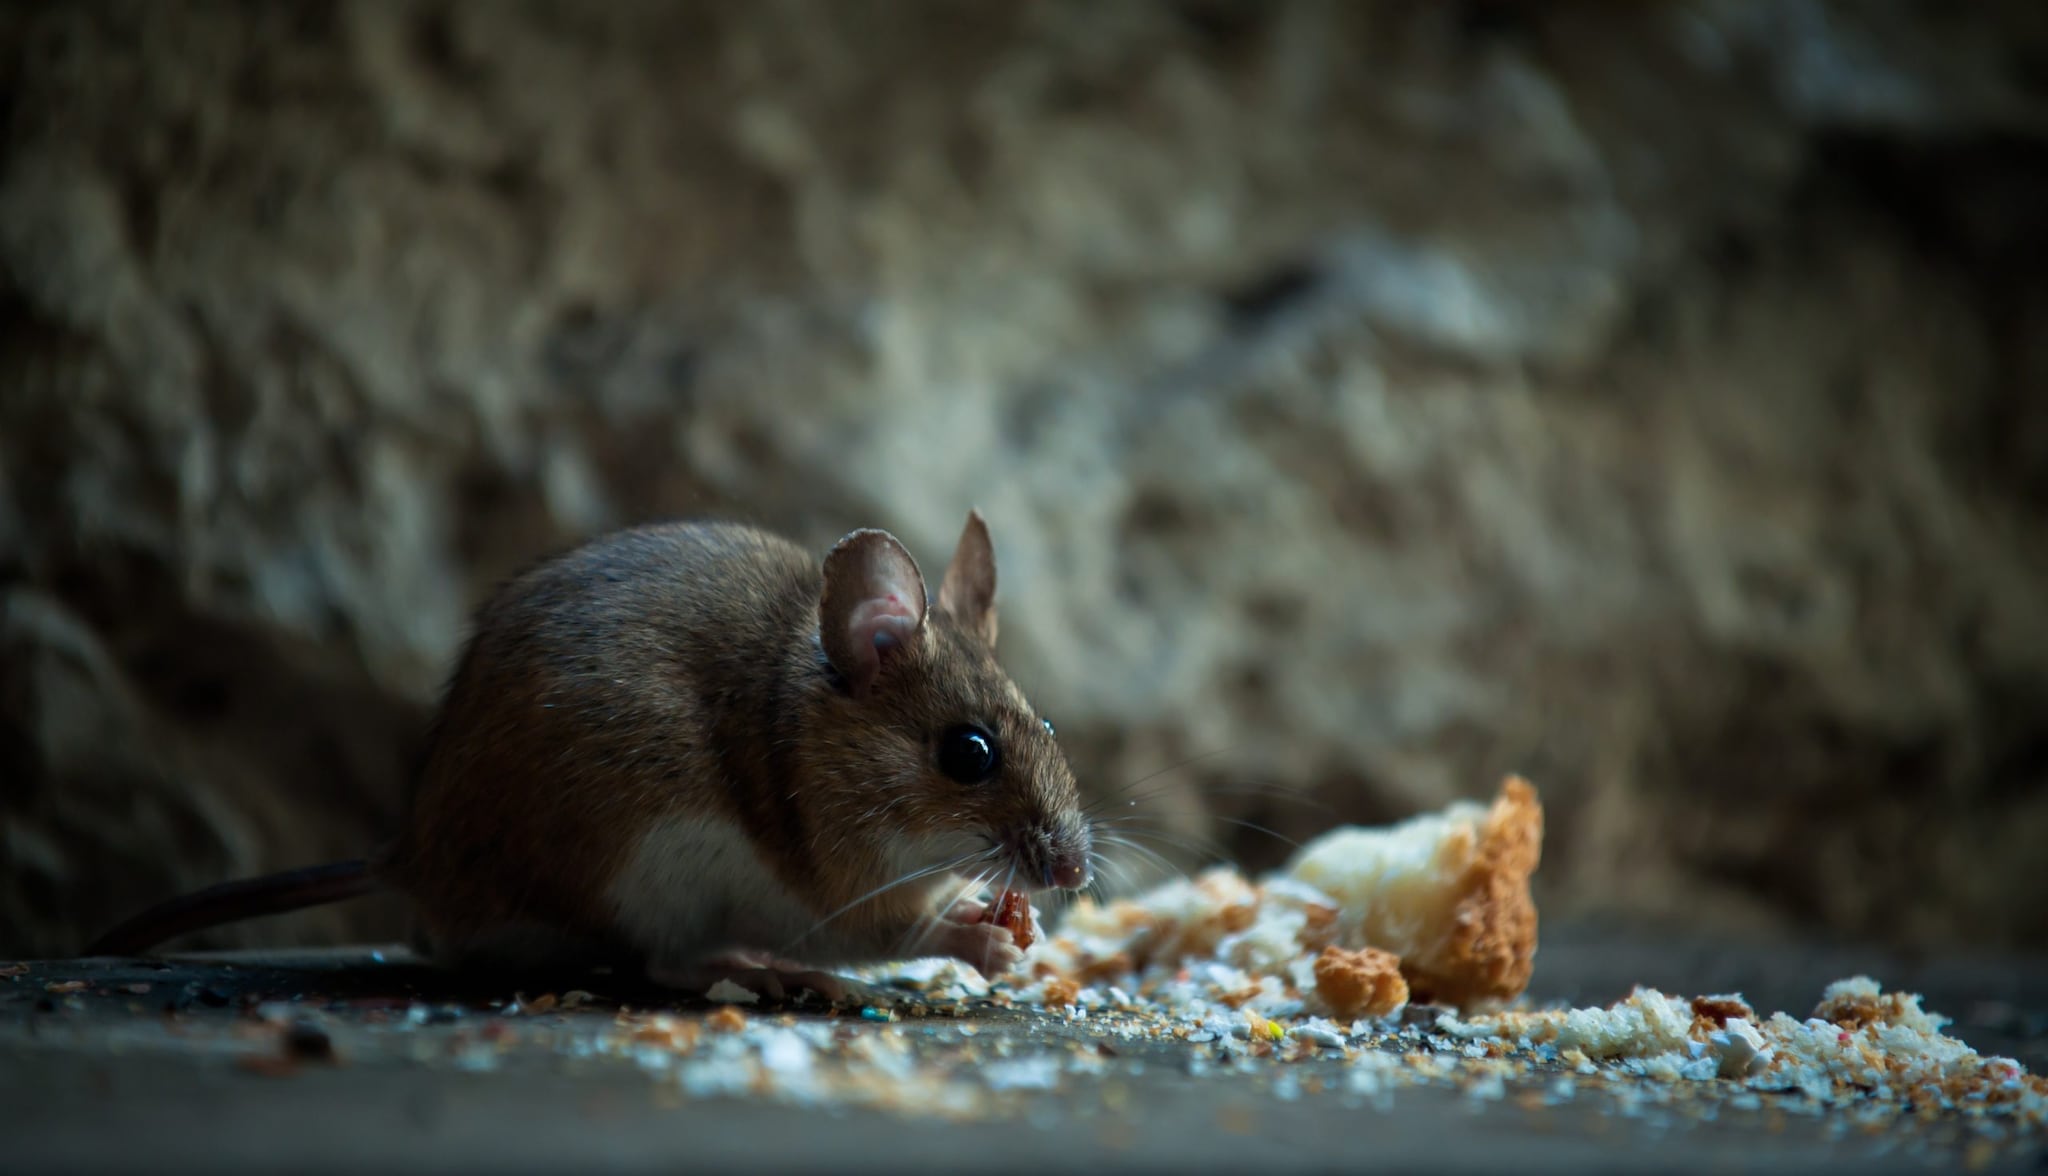 Rodent eating crumbs